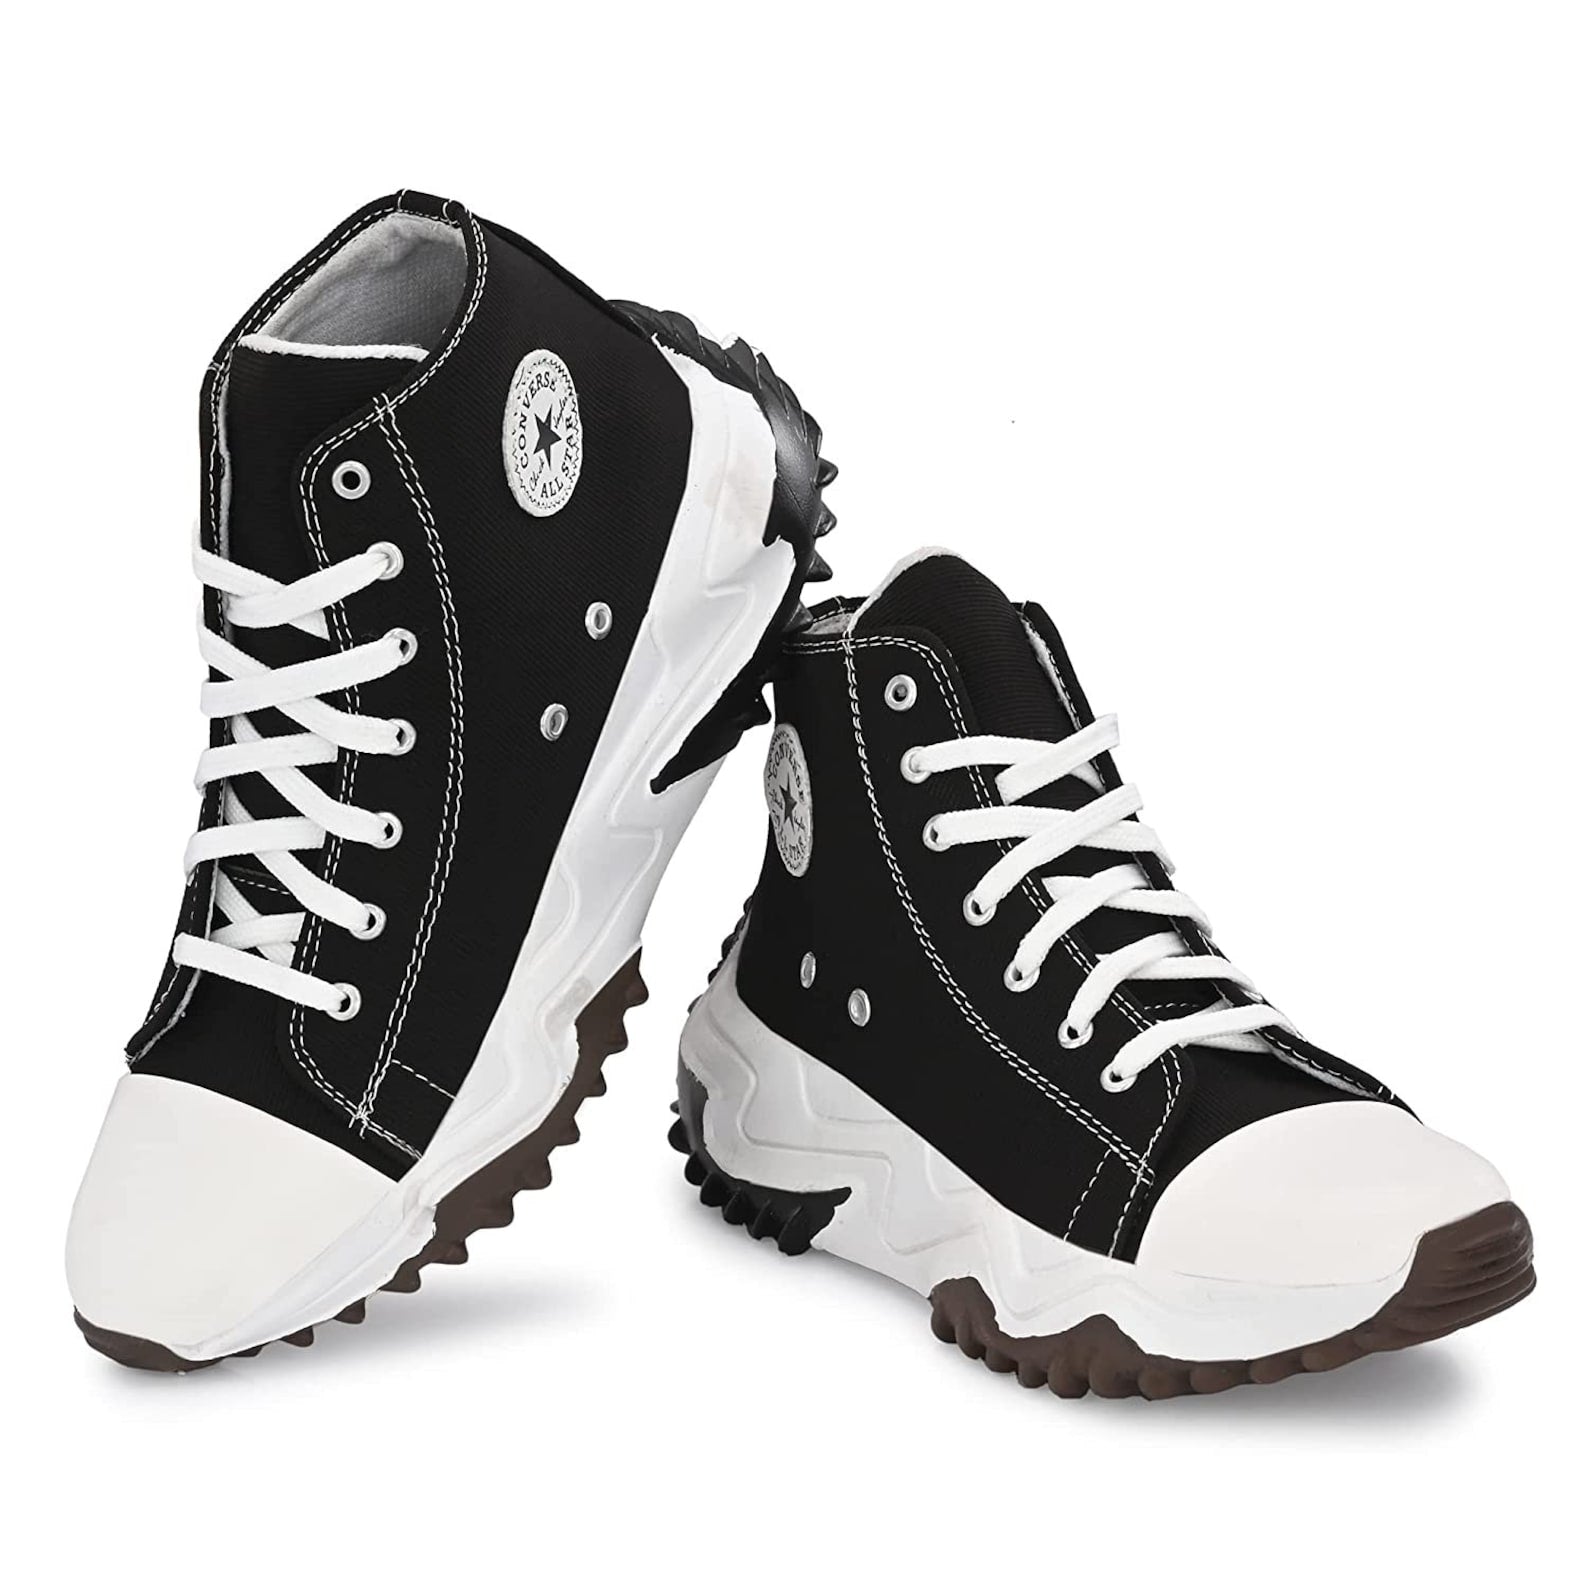 EaseStride High Tops Shoes